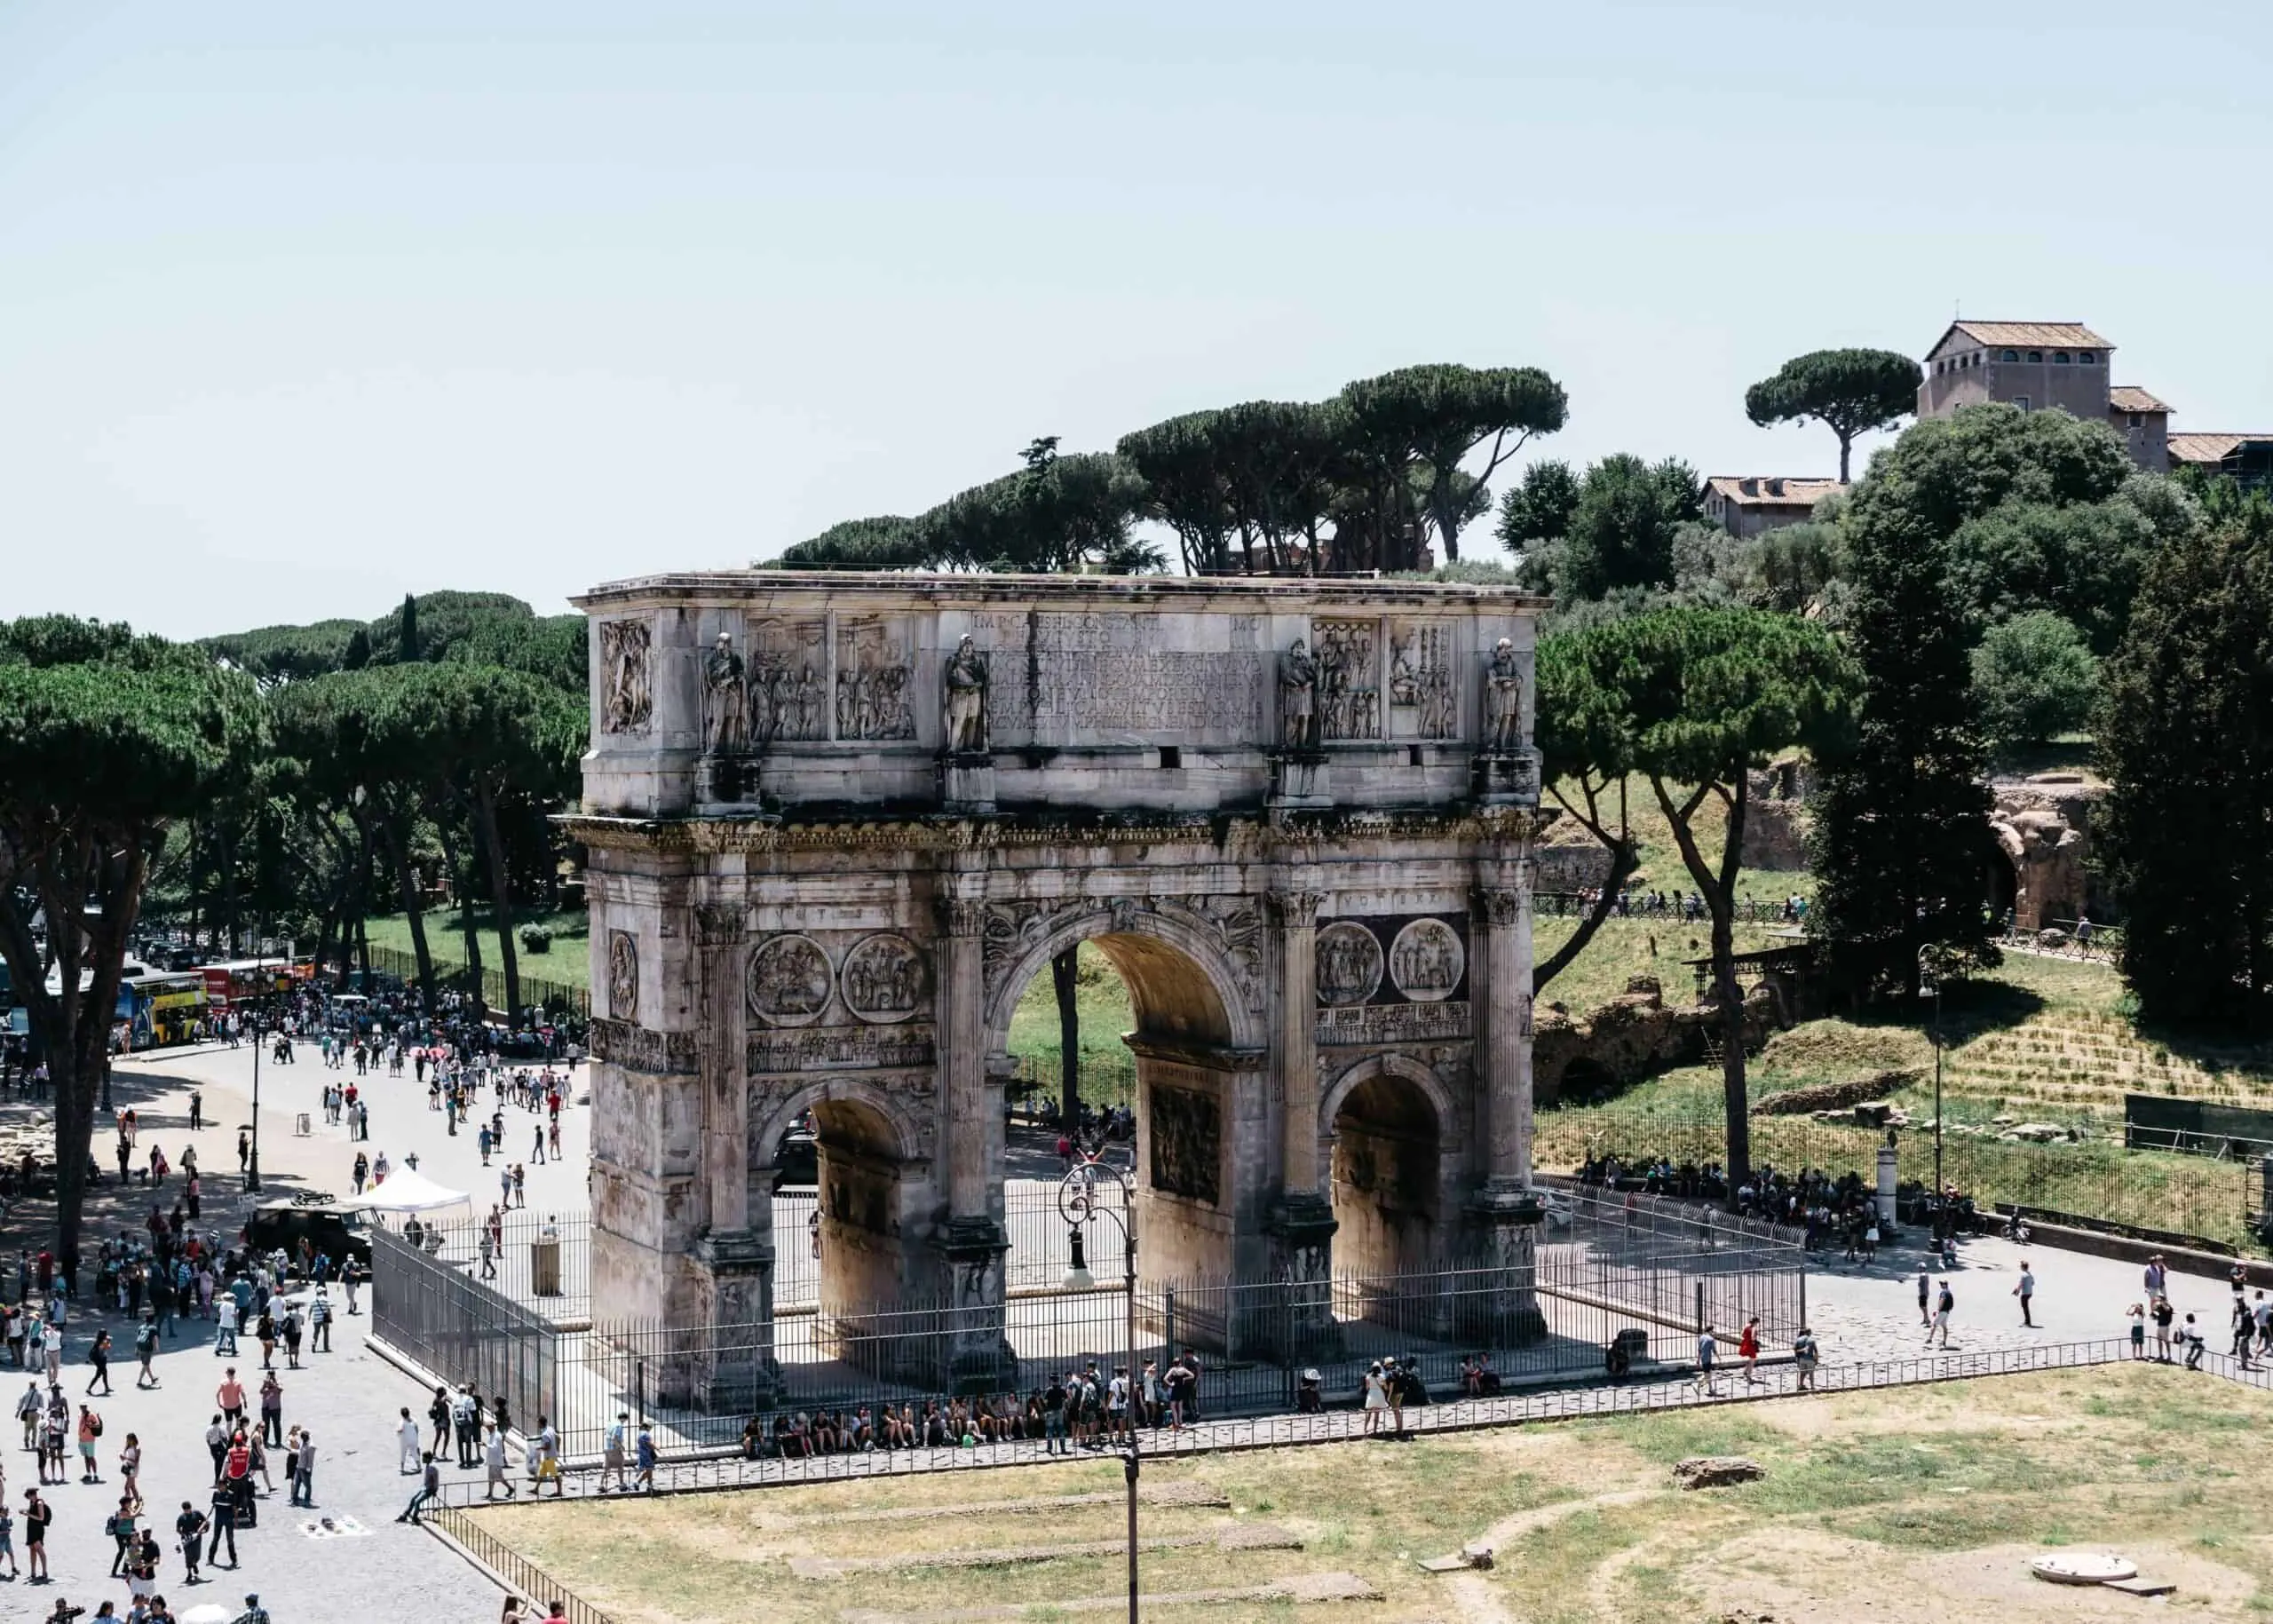 One day in Rome - A self guided walking tour of Rome.